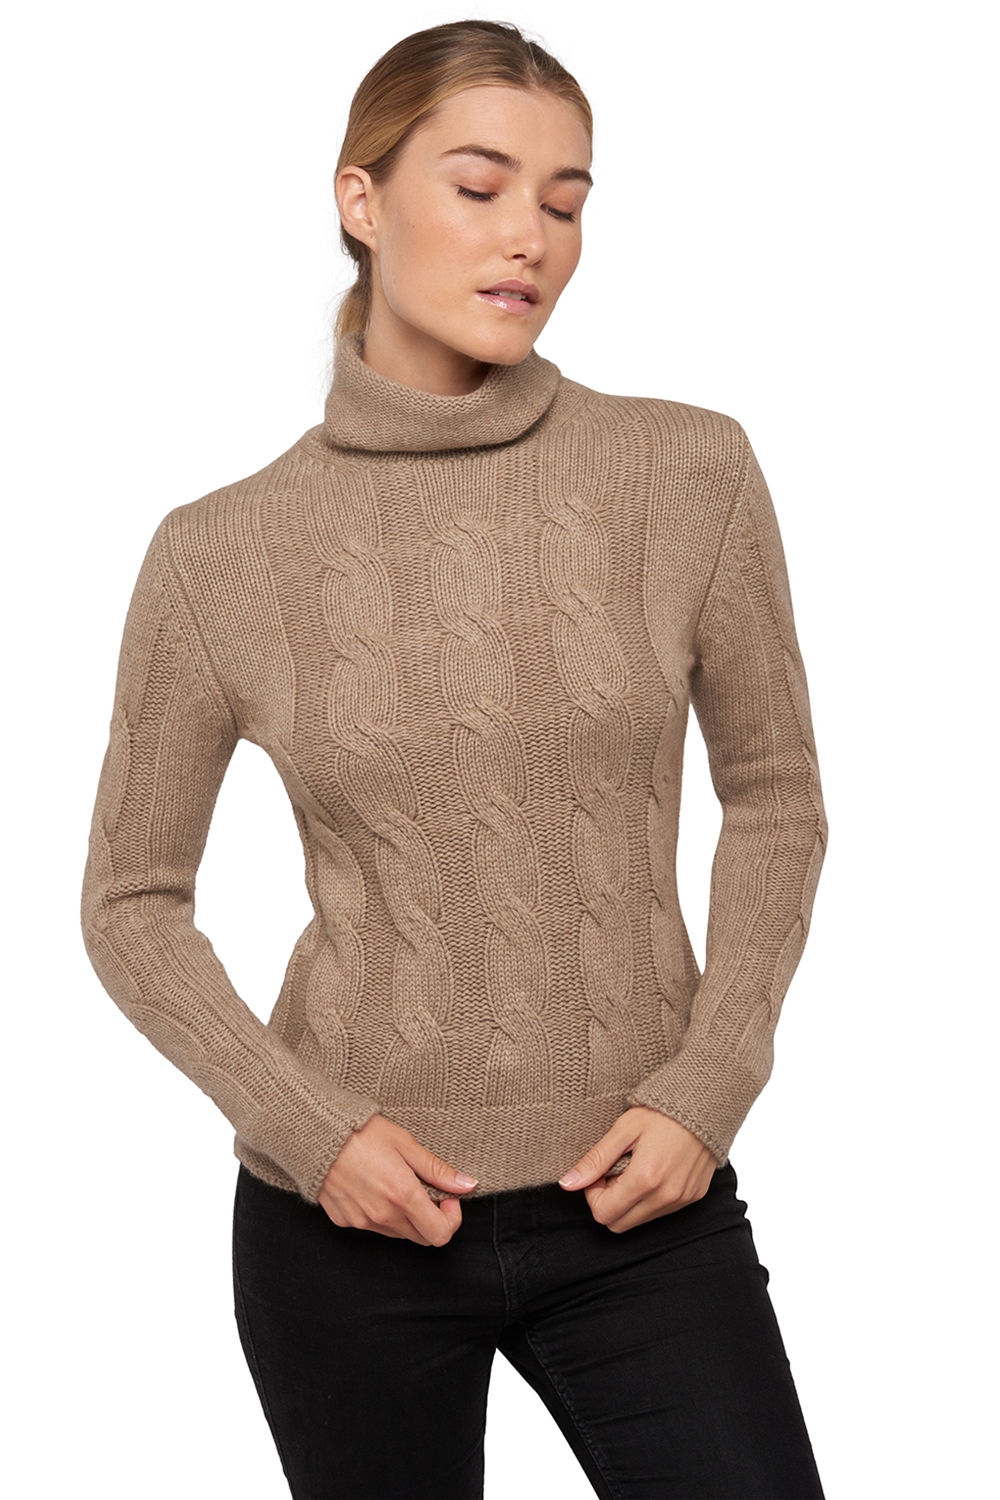 Cachemire Naturel pull femme col roule natural blabla natural brown 3xl